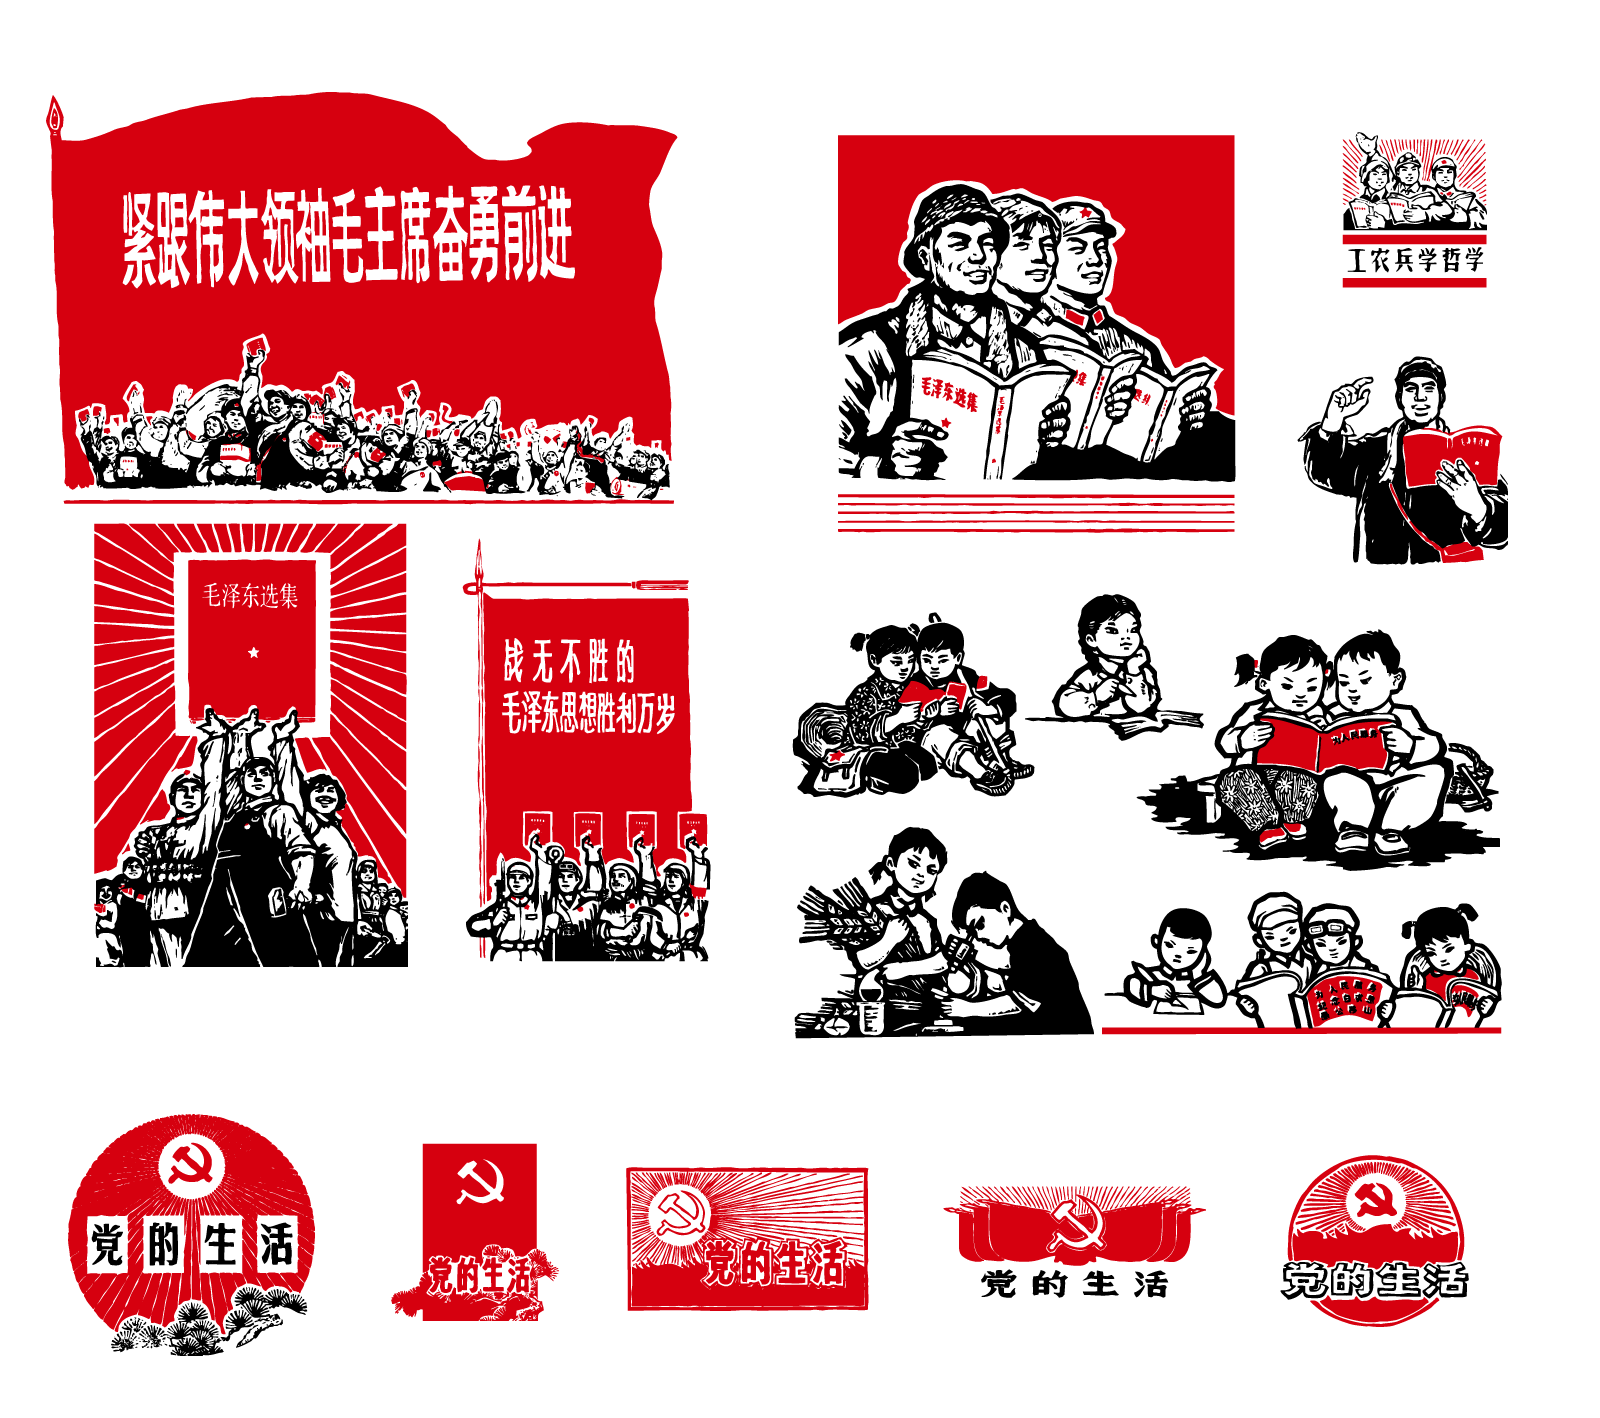 labor is the most glorious - Long live chairman MAO, long live the communist party - China Illustrations Vectors AI ESP